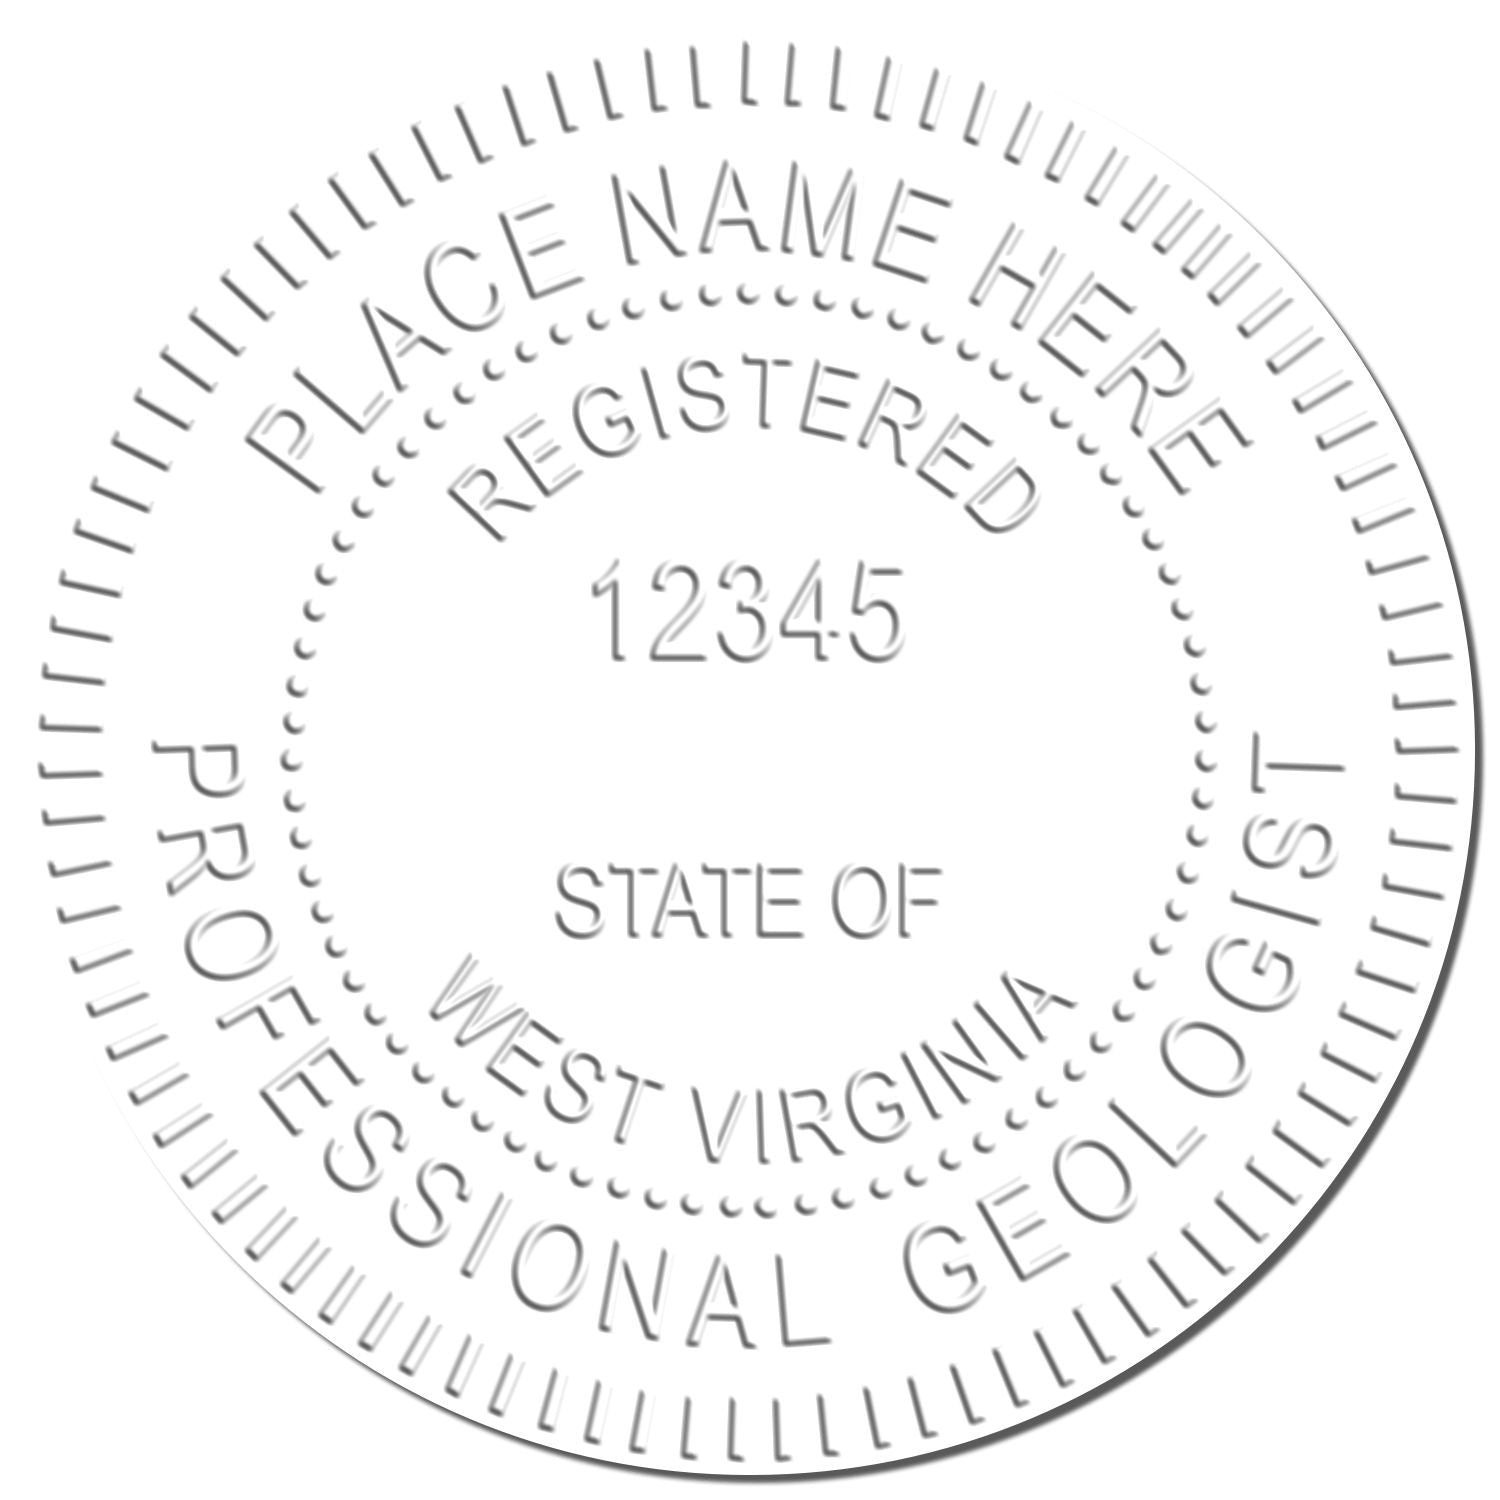 The West Virginia Geologist Desk Seal stamp impression comes to life with a crisp, detailed image stamped on paper - showcasing true professional quality.